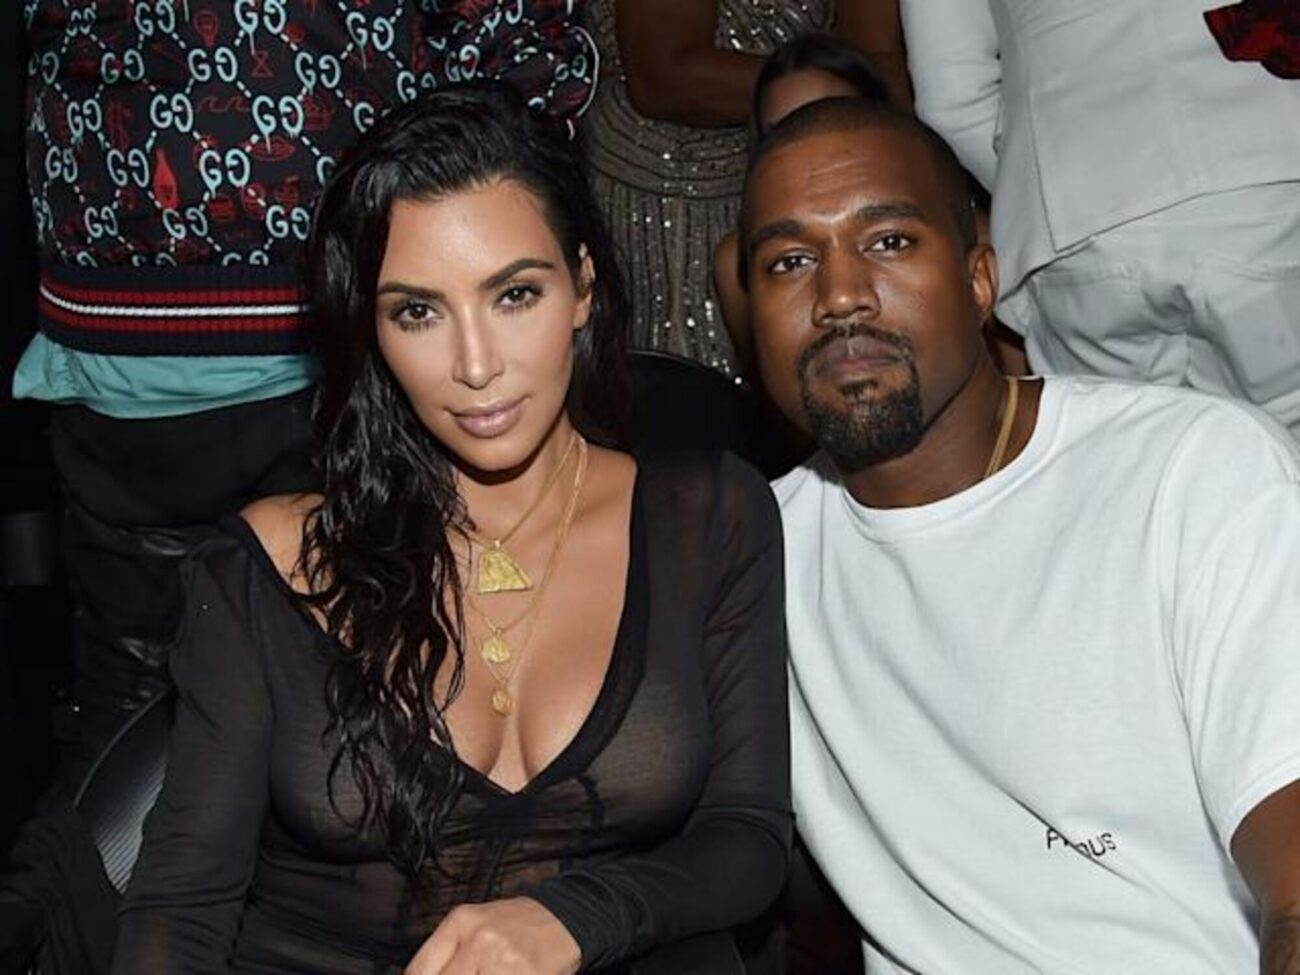 Is Kimye back together? Kim Kardashian gave an explosive interview that has Twitter wondering. See if the rumors are really true here.